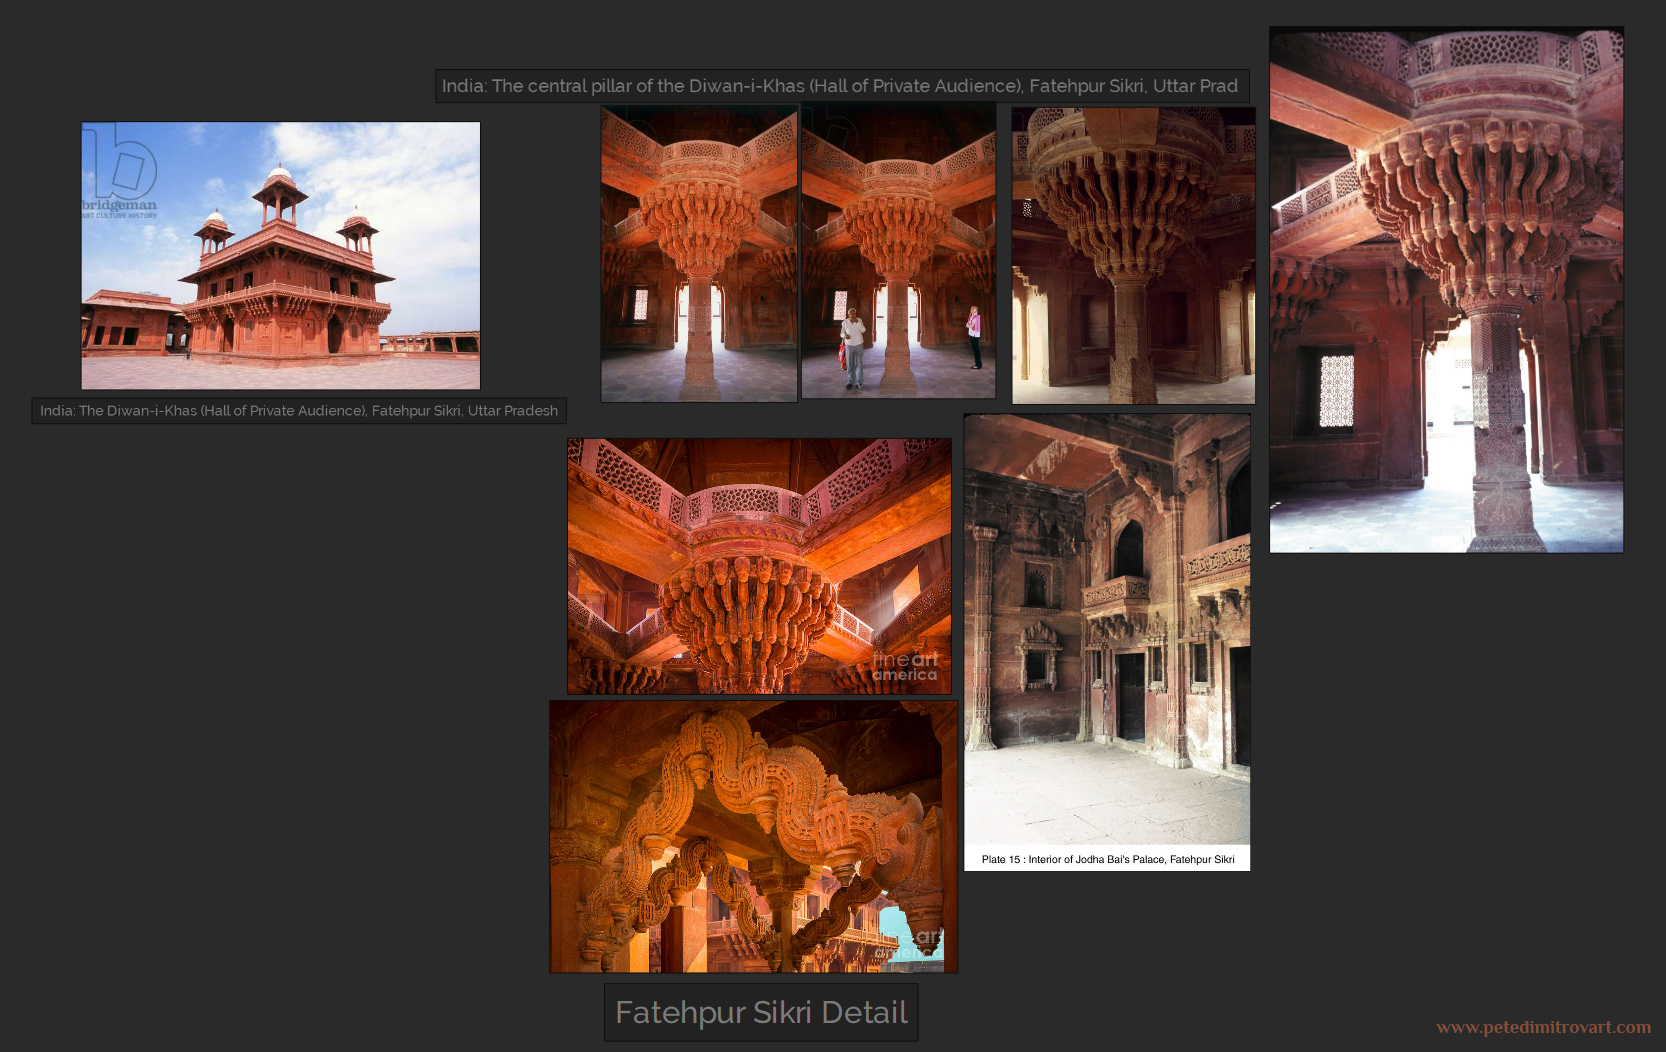 Reference board screenshot consisting of photographs from Hall of Private Audience, Fatehpur Sikri, Uttar Pradesh, India. Images depict red stoneworks carvings that loop into intricate patterns and snake like elements. There is also a photo from - “Interior of Hodha Bai’s Palace, Fatehpur Sikri”.